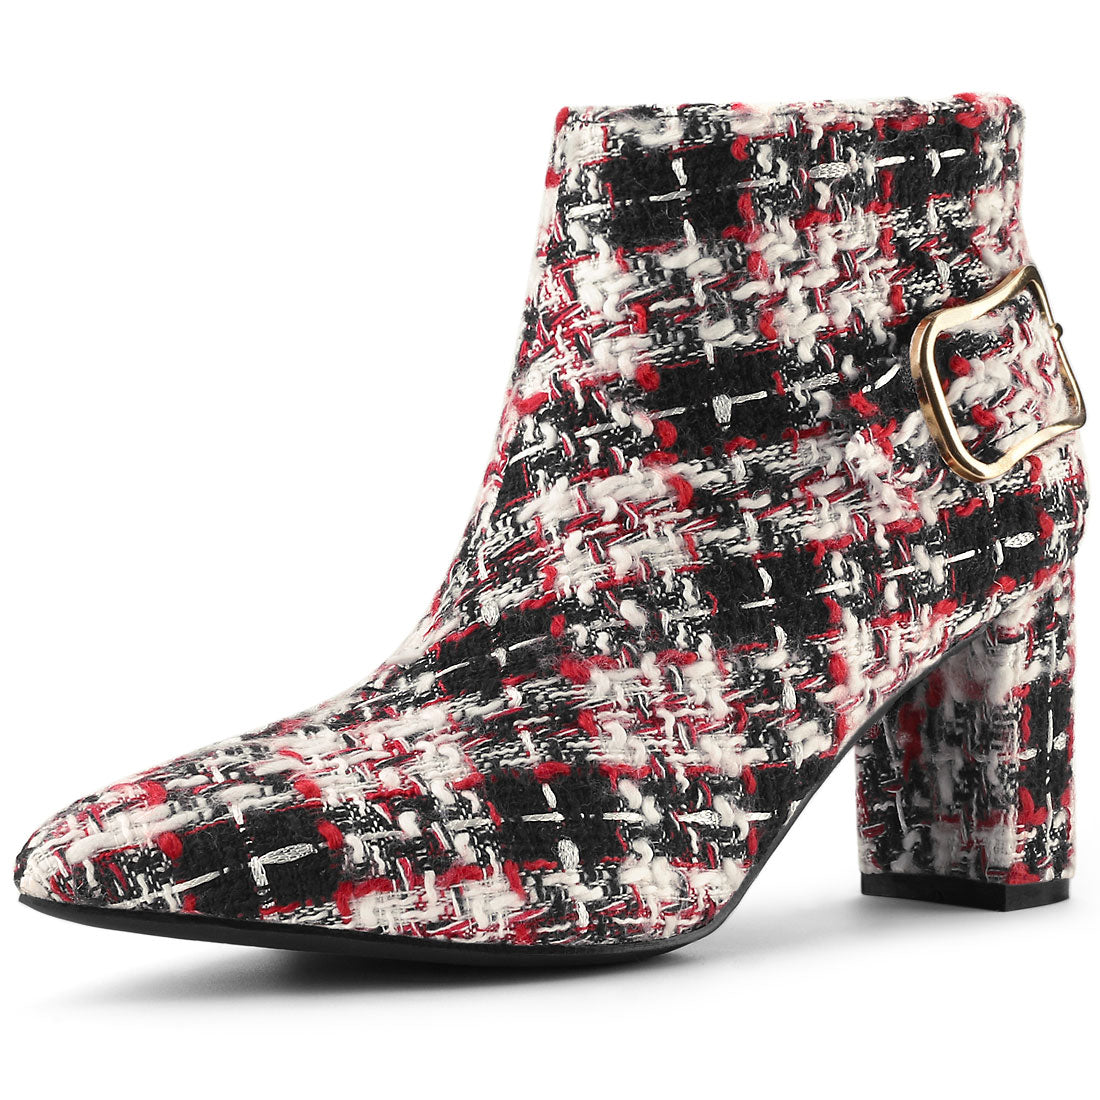 Allegra K Plaid Pointed Toe Chunky Heel Ankle Boots